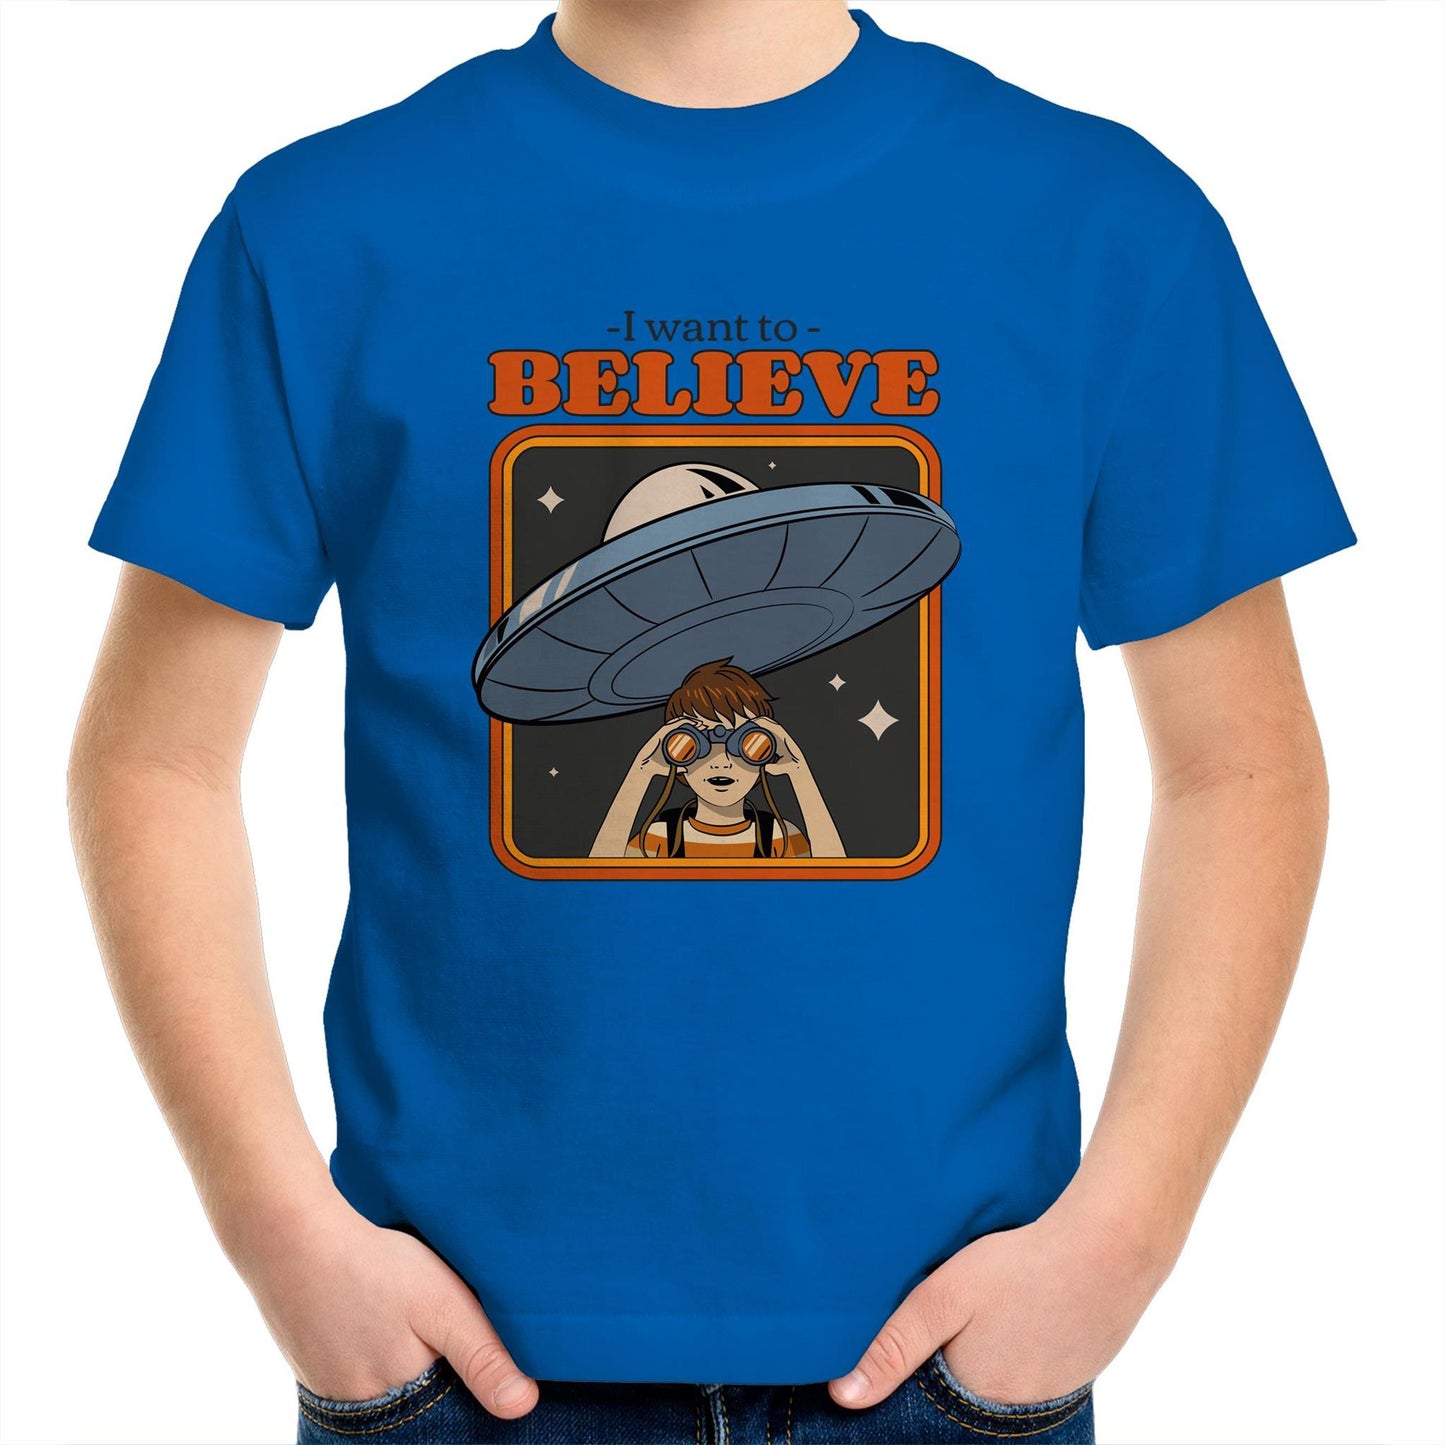 I Want To Believe - Kids Youth Crew T-Shirt Bright Royal Kids Youth T-shirt Sci Fi